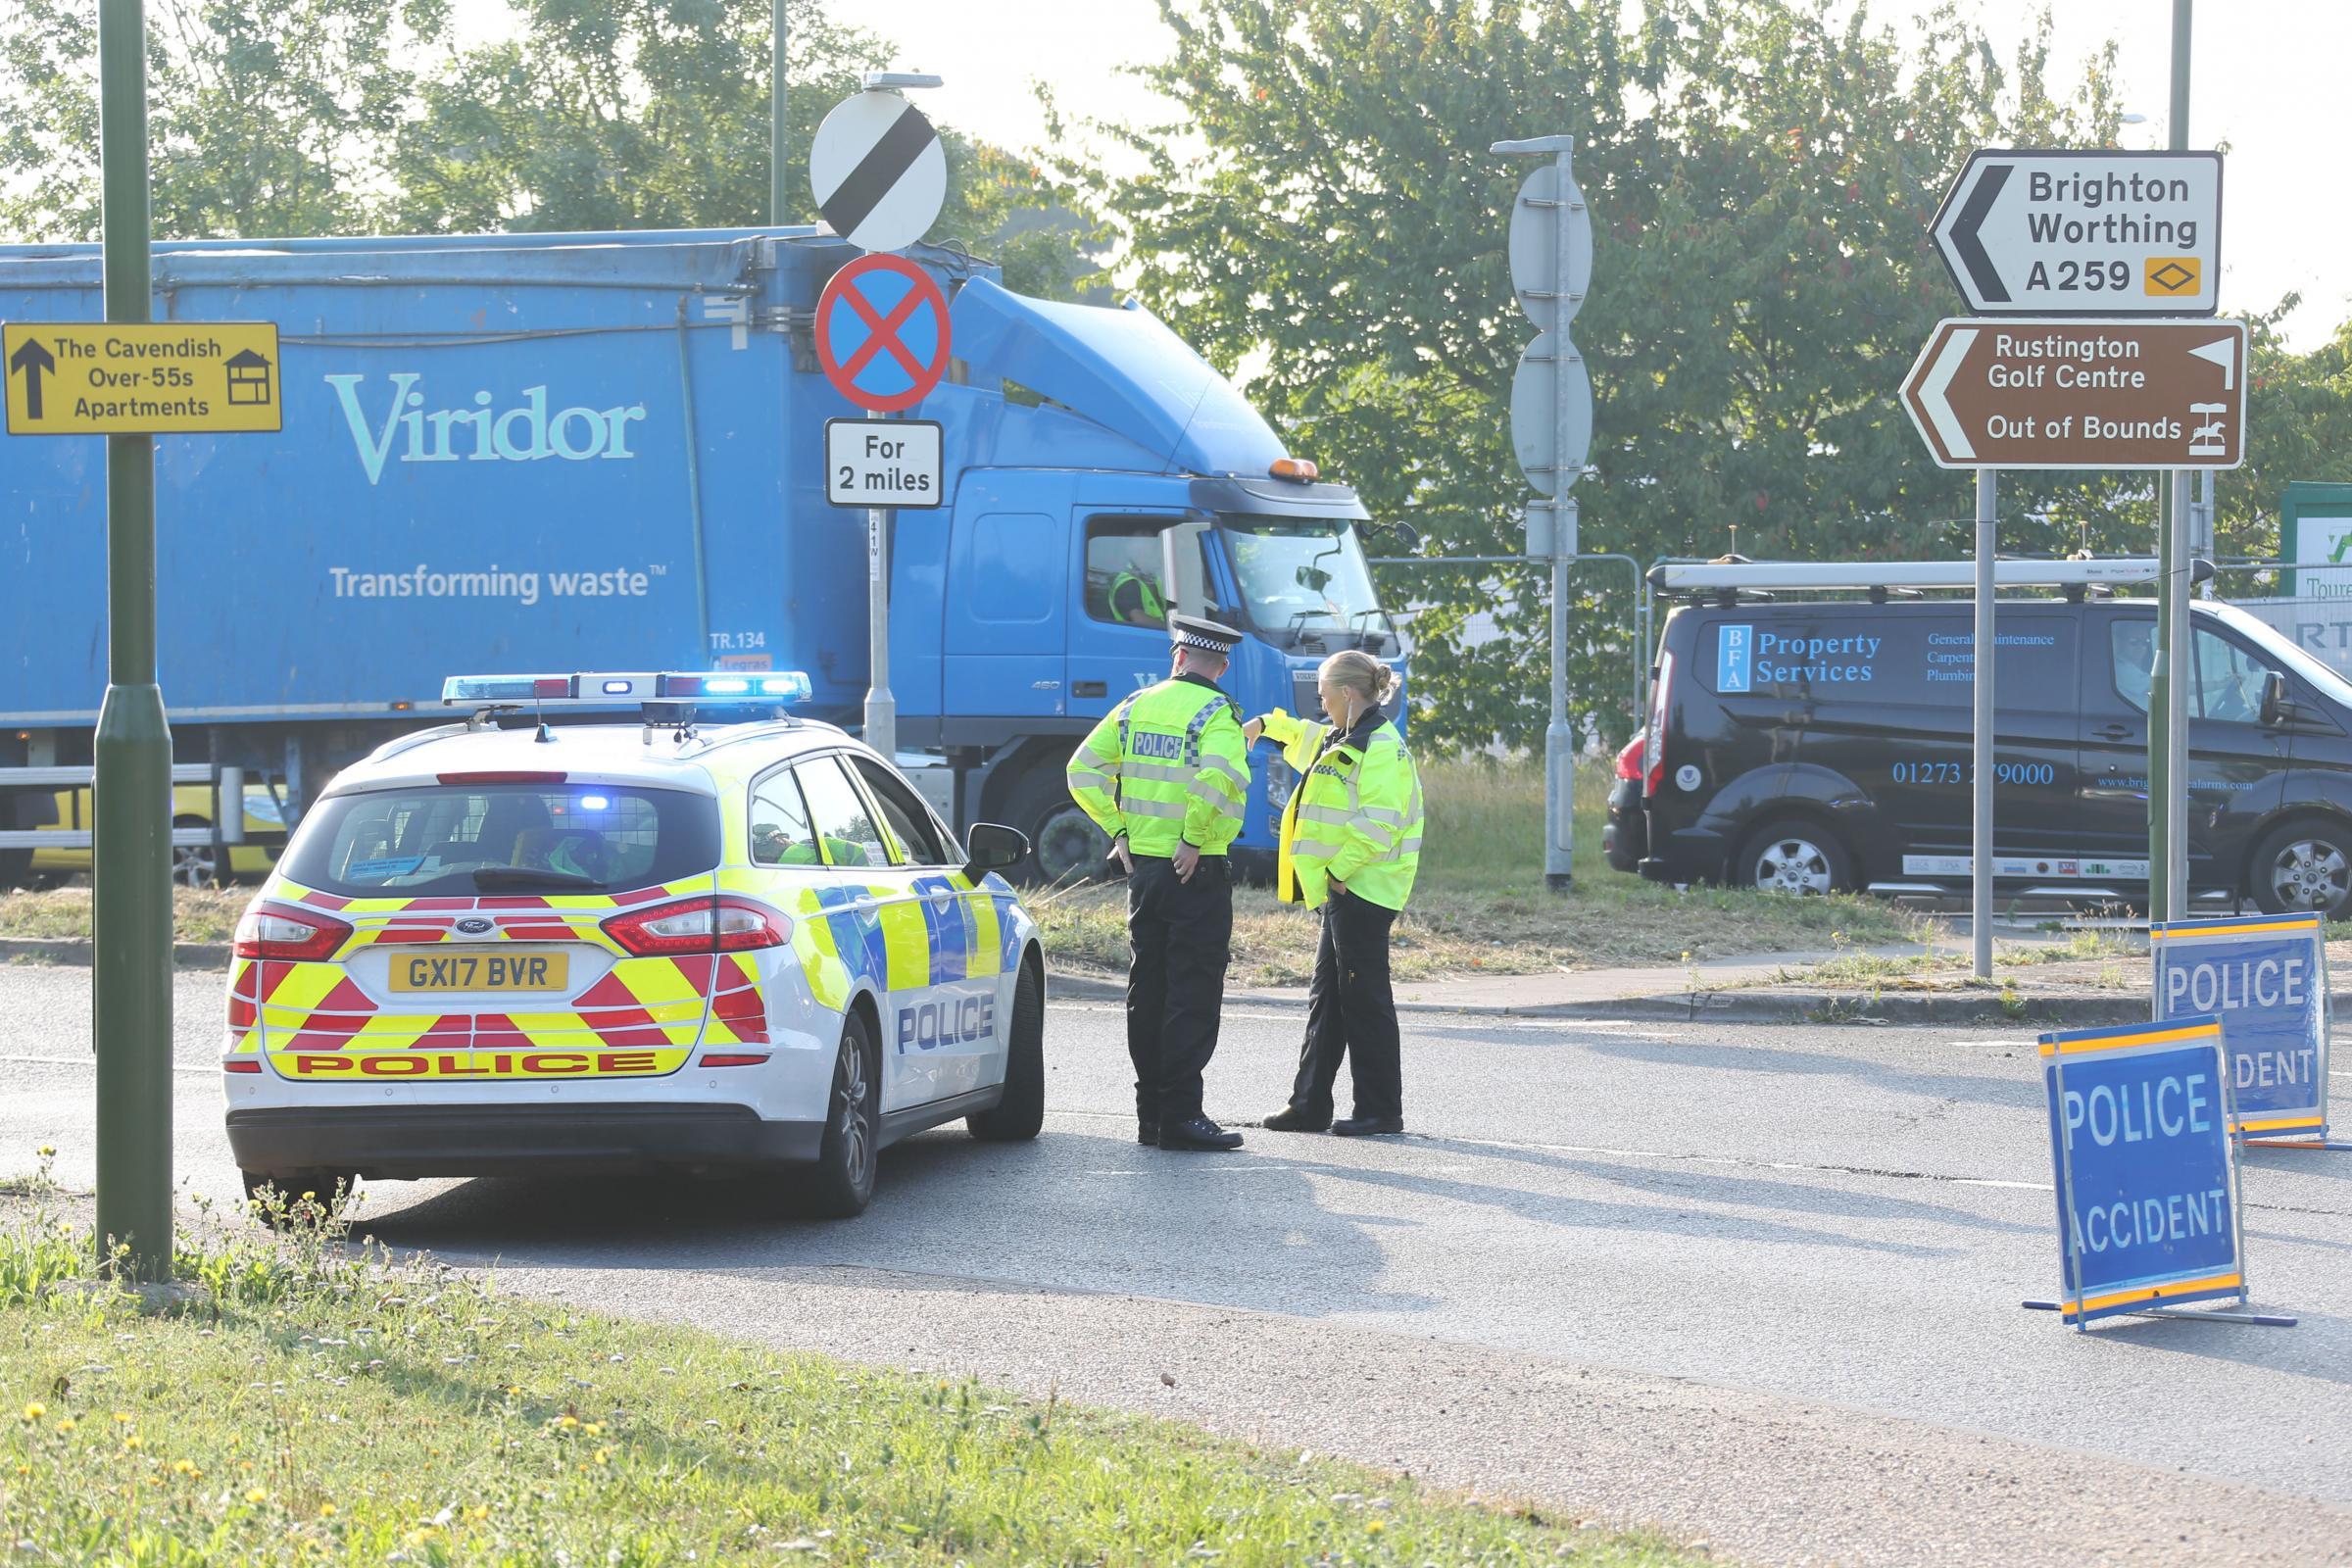 James MacKie is accused of causing death by either dangerous or careless driving after cyclist Simon Jones, 48, died on the A259 Worthing Road, Wick